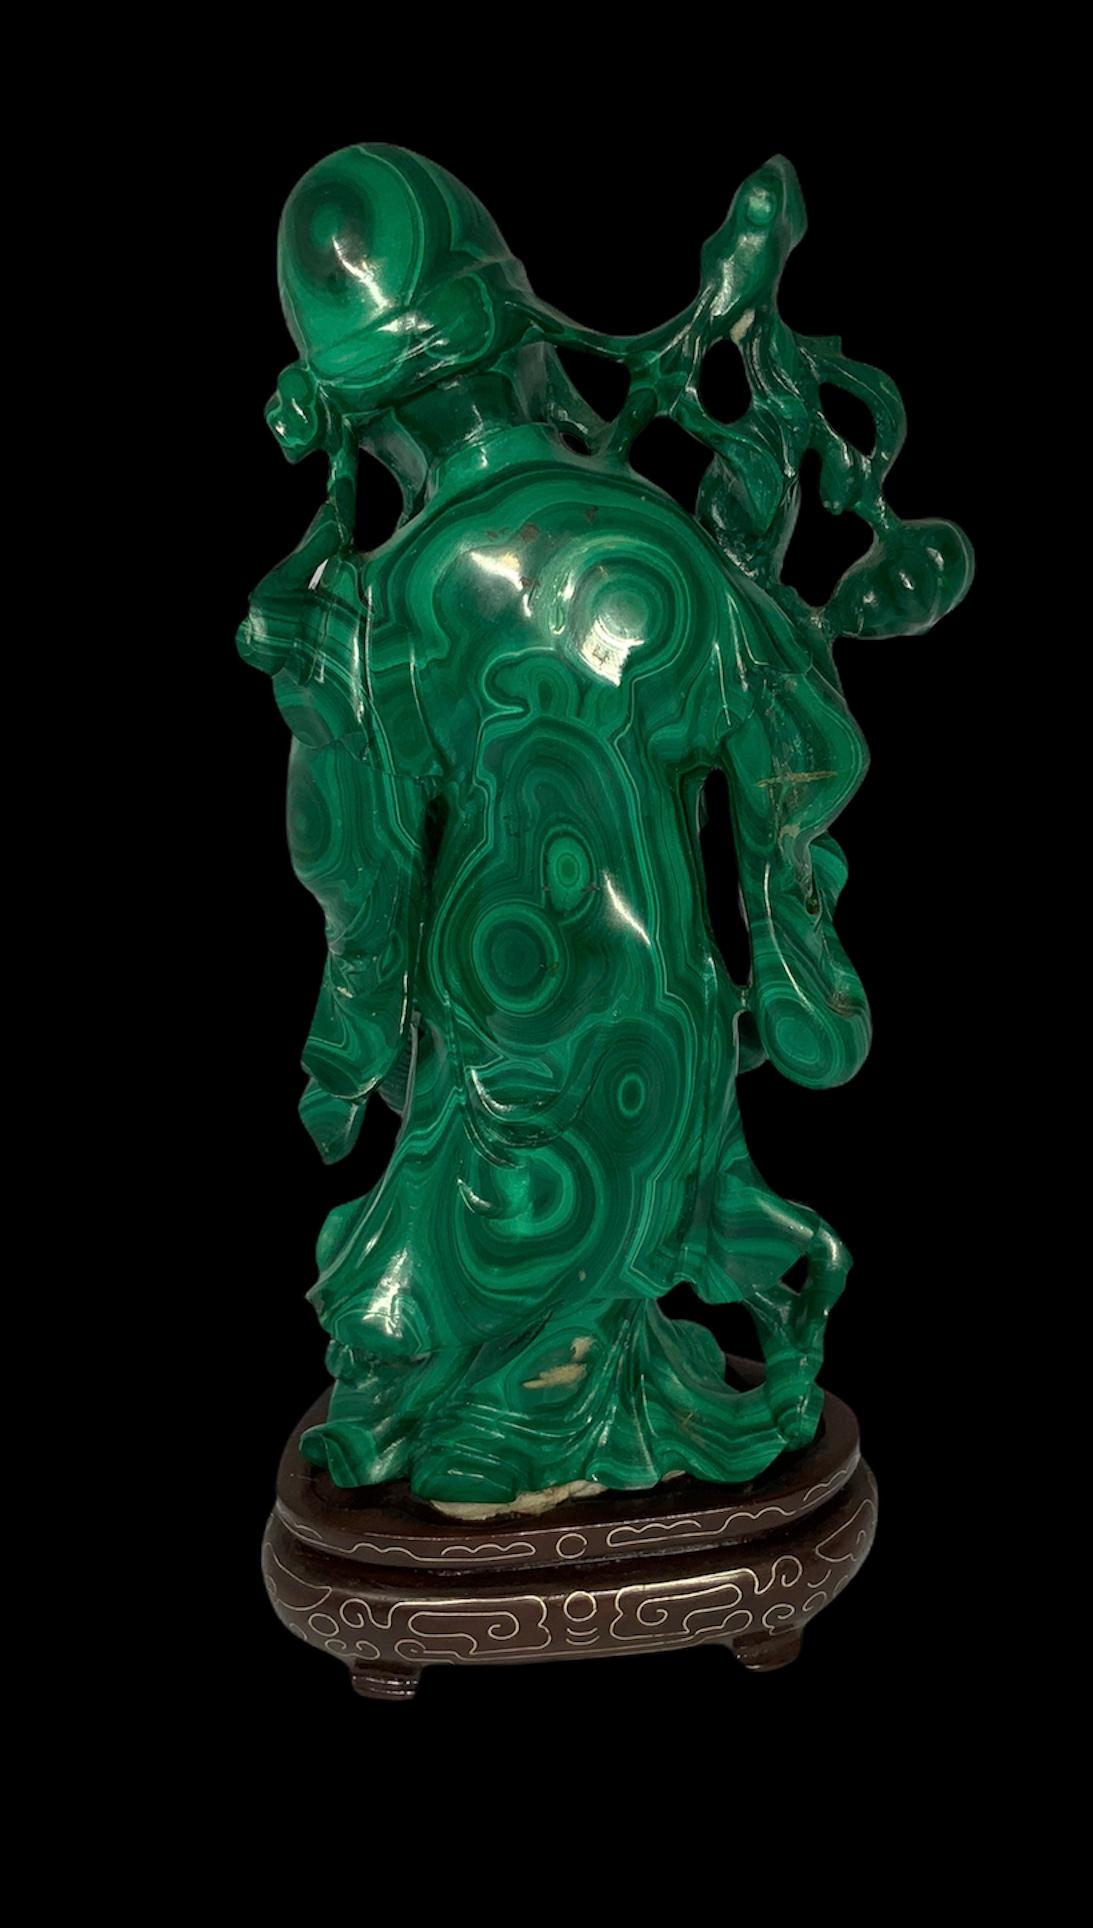 Hand carved Malachite of small sculpture of Shou Xing Gong depicting a happy face old man with beard and a heavy oriental robe. He is holding in his right hand a staff with branches of peaches twisting around it and in the left hand a basket full of